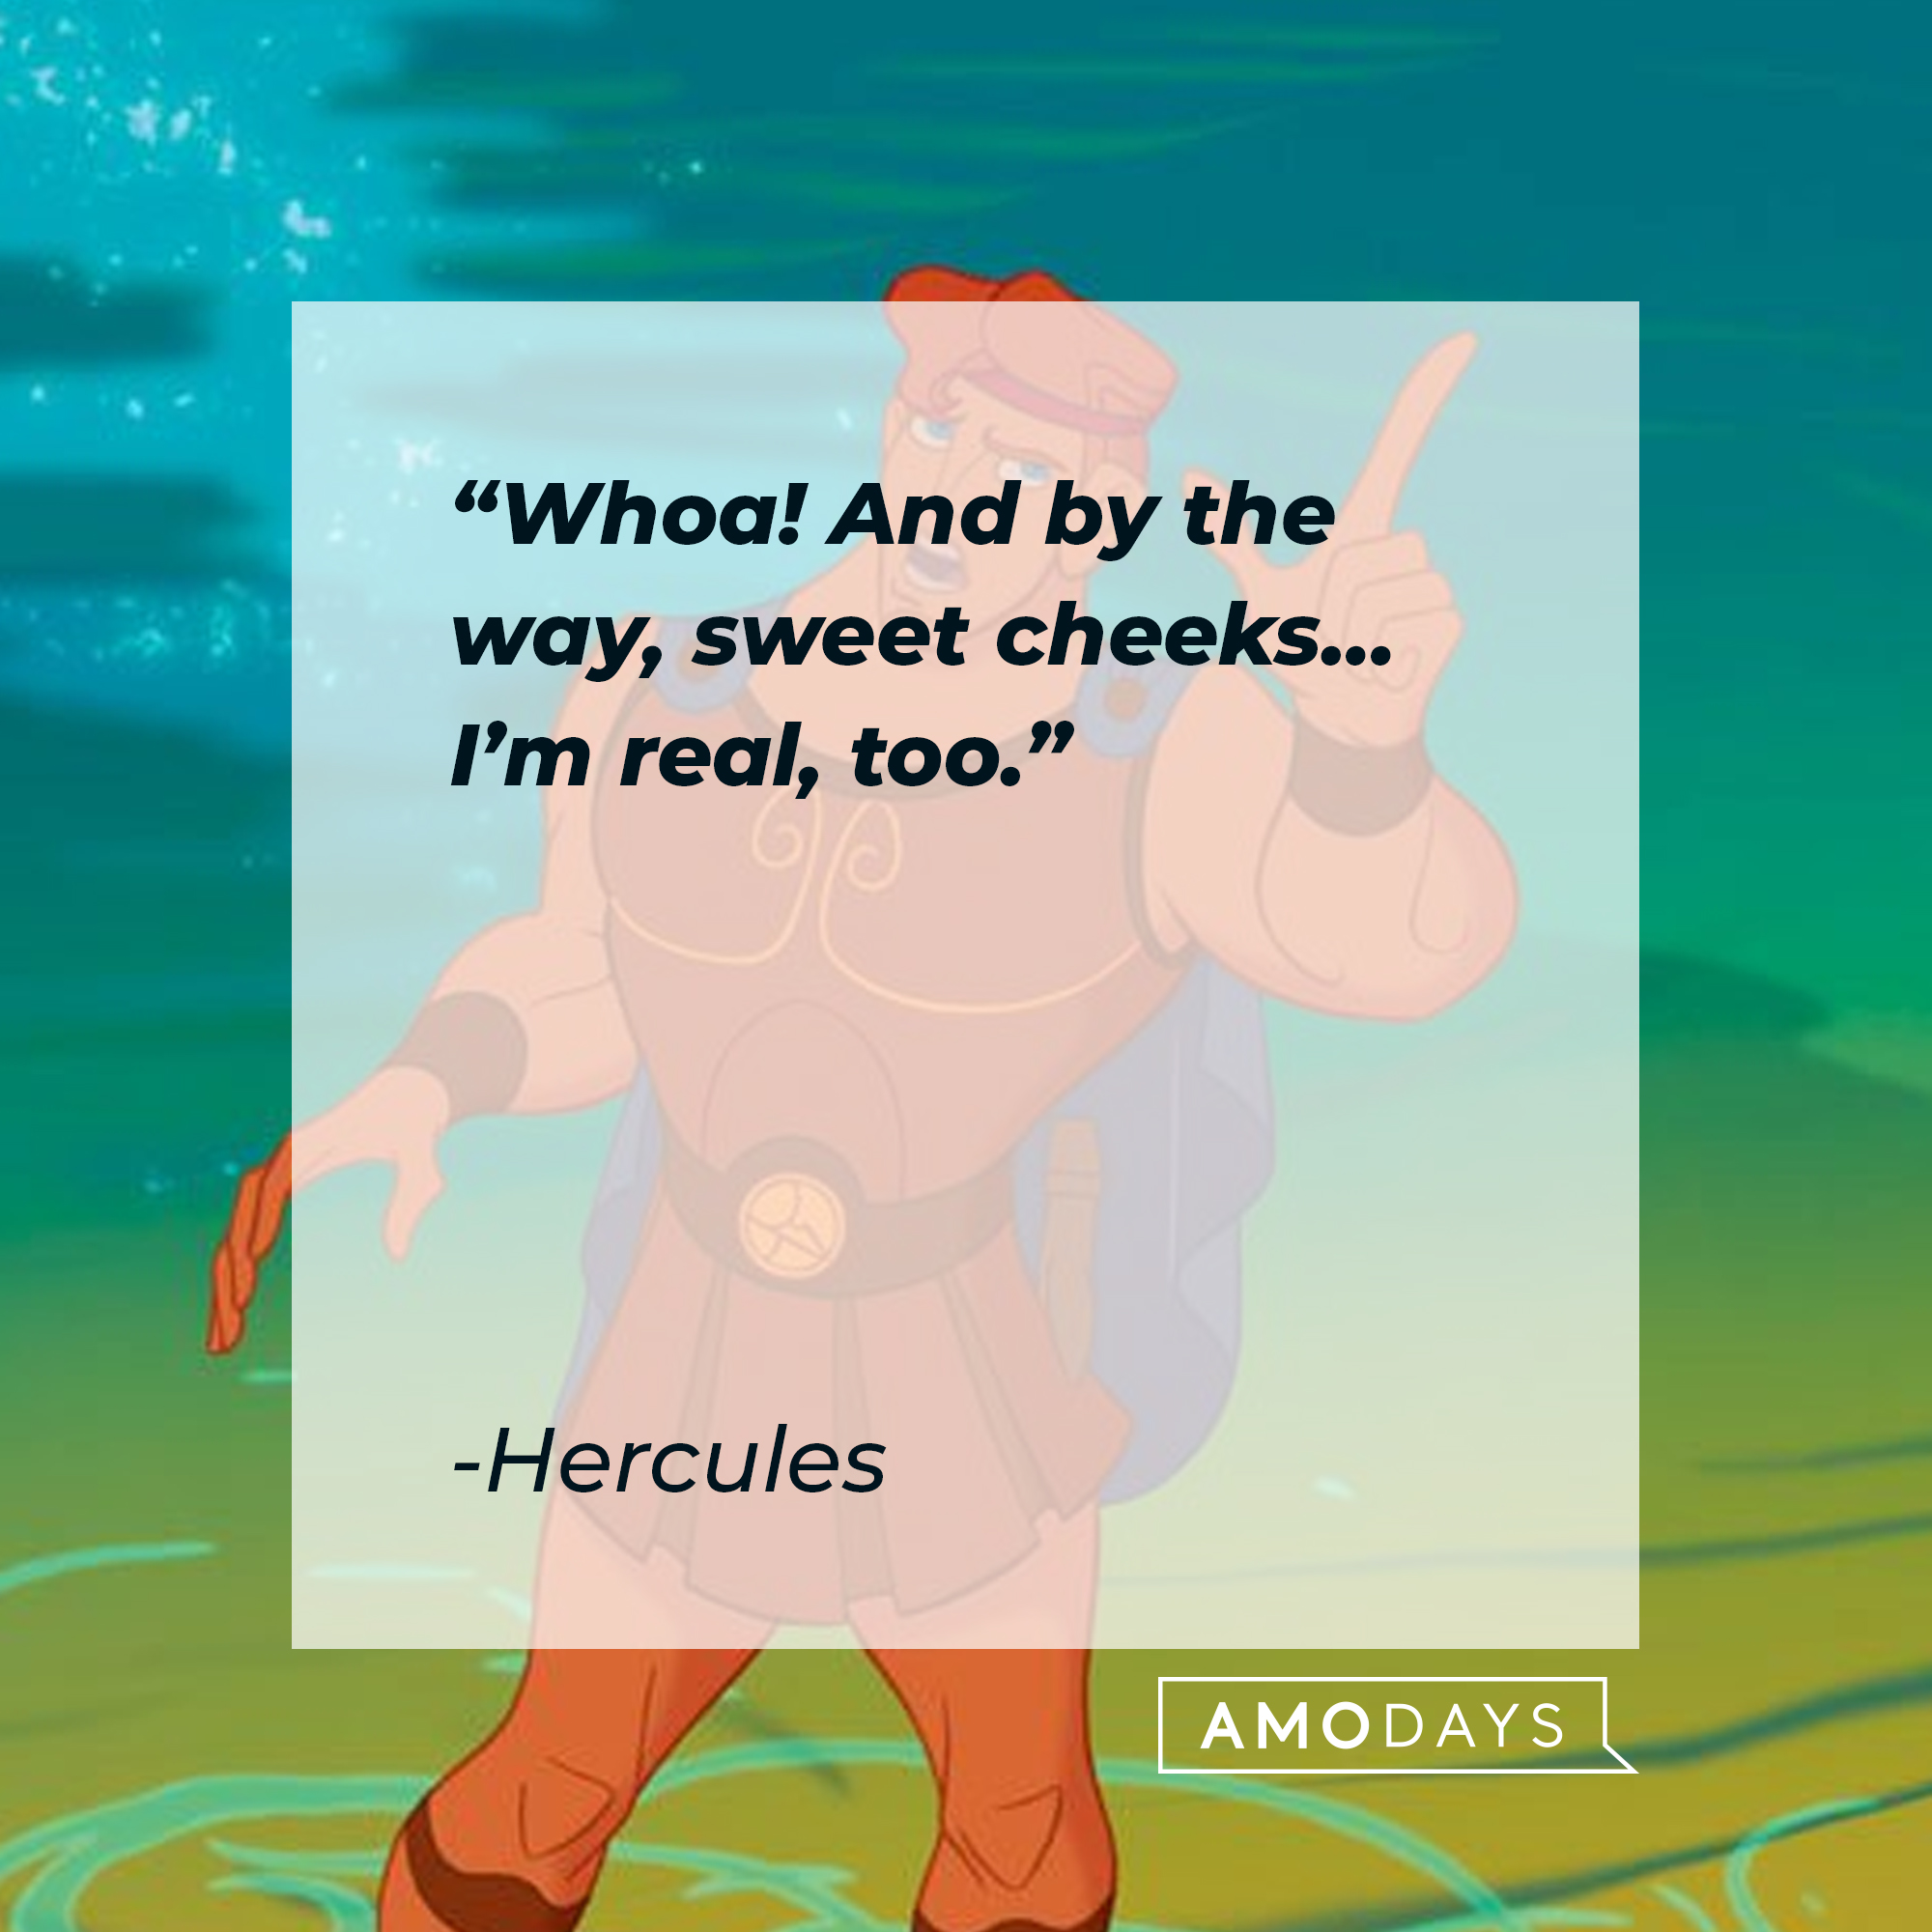 Hercules with his quote from "Hercules" movie: “Whoa! And by the way, sweet cheeks… I’m real, too." | Source: Facebook.com/DisneyHercules